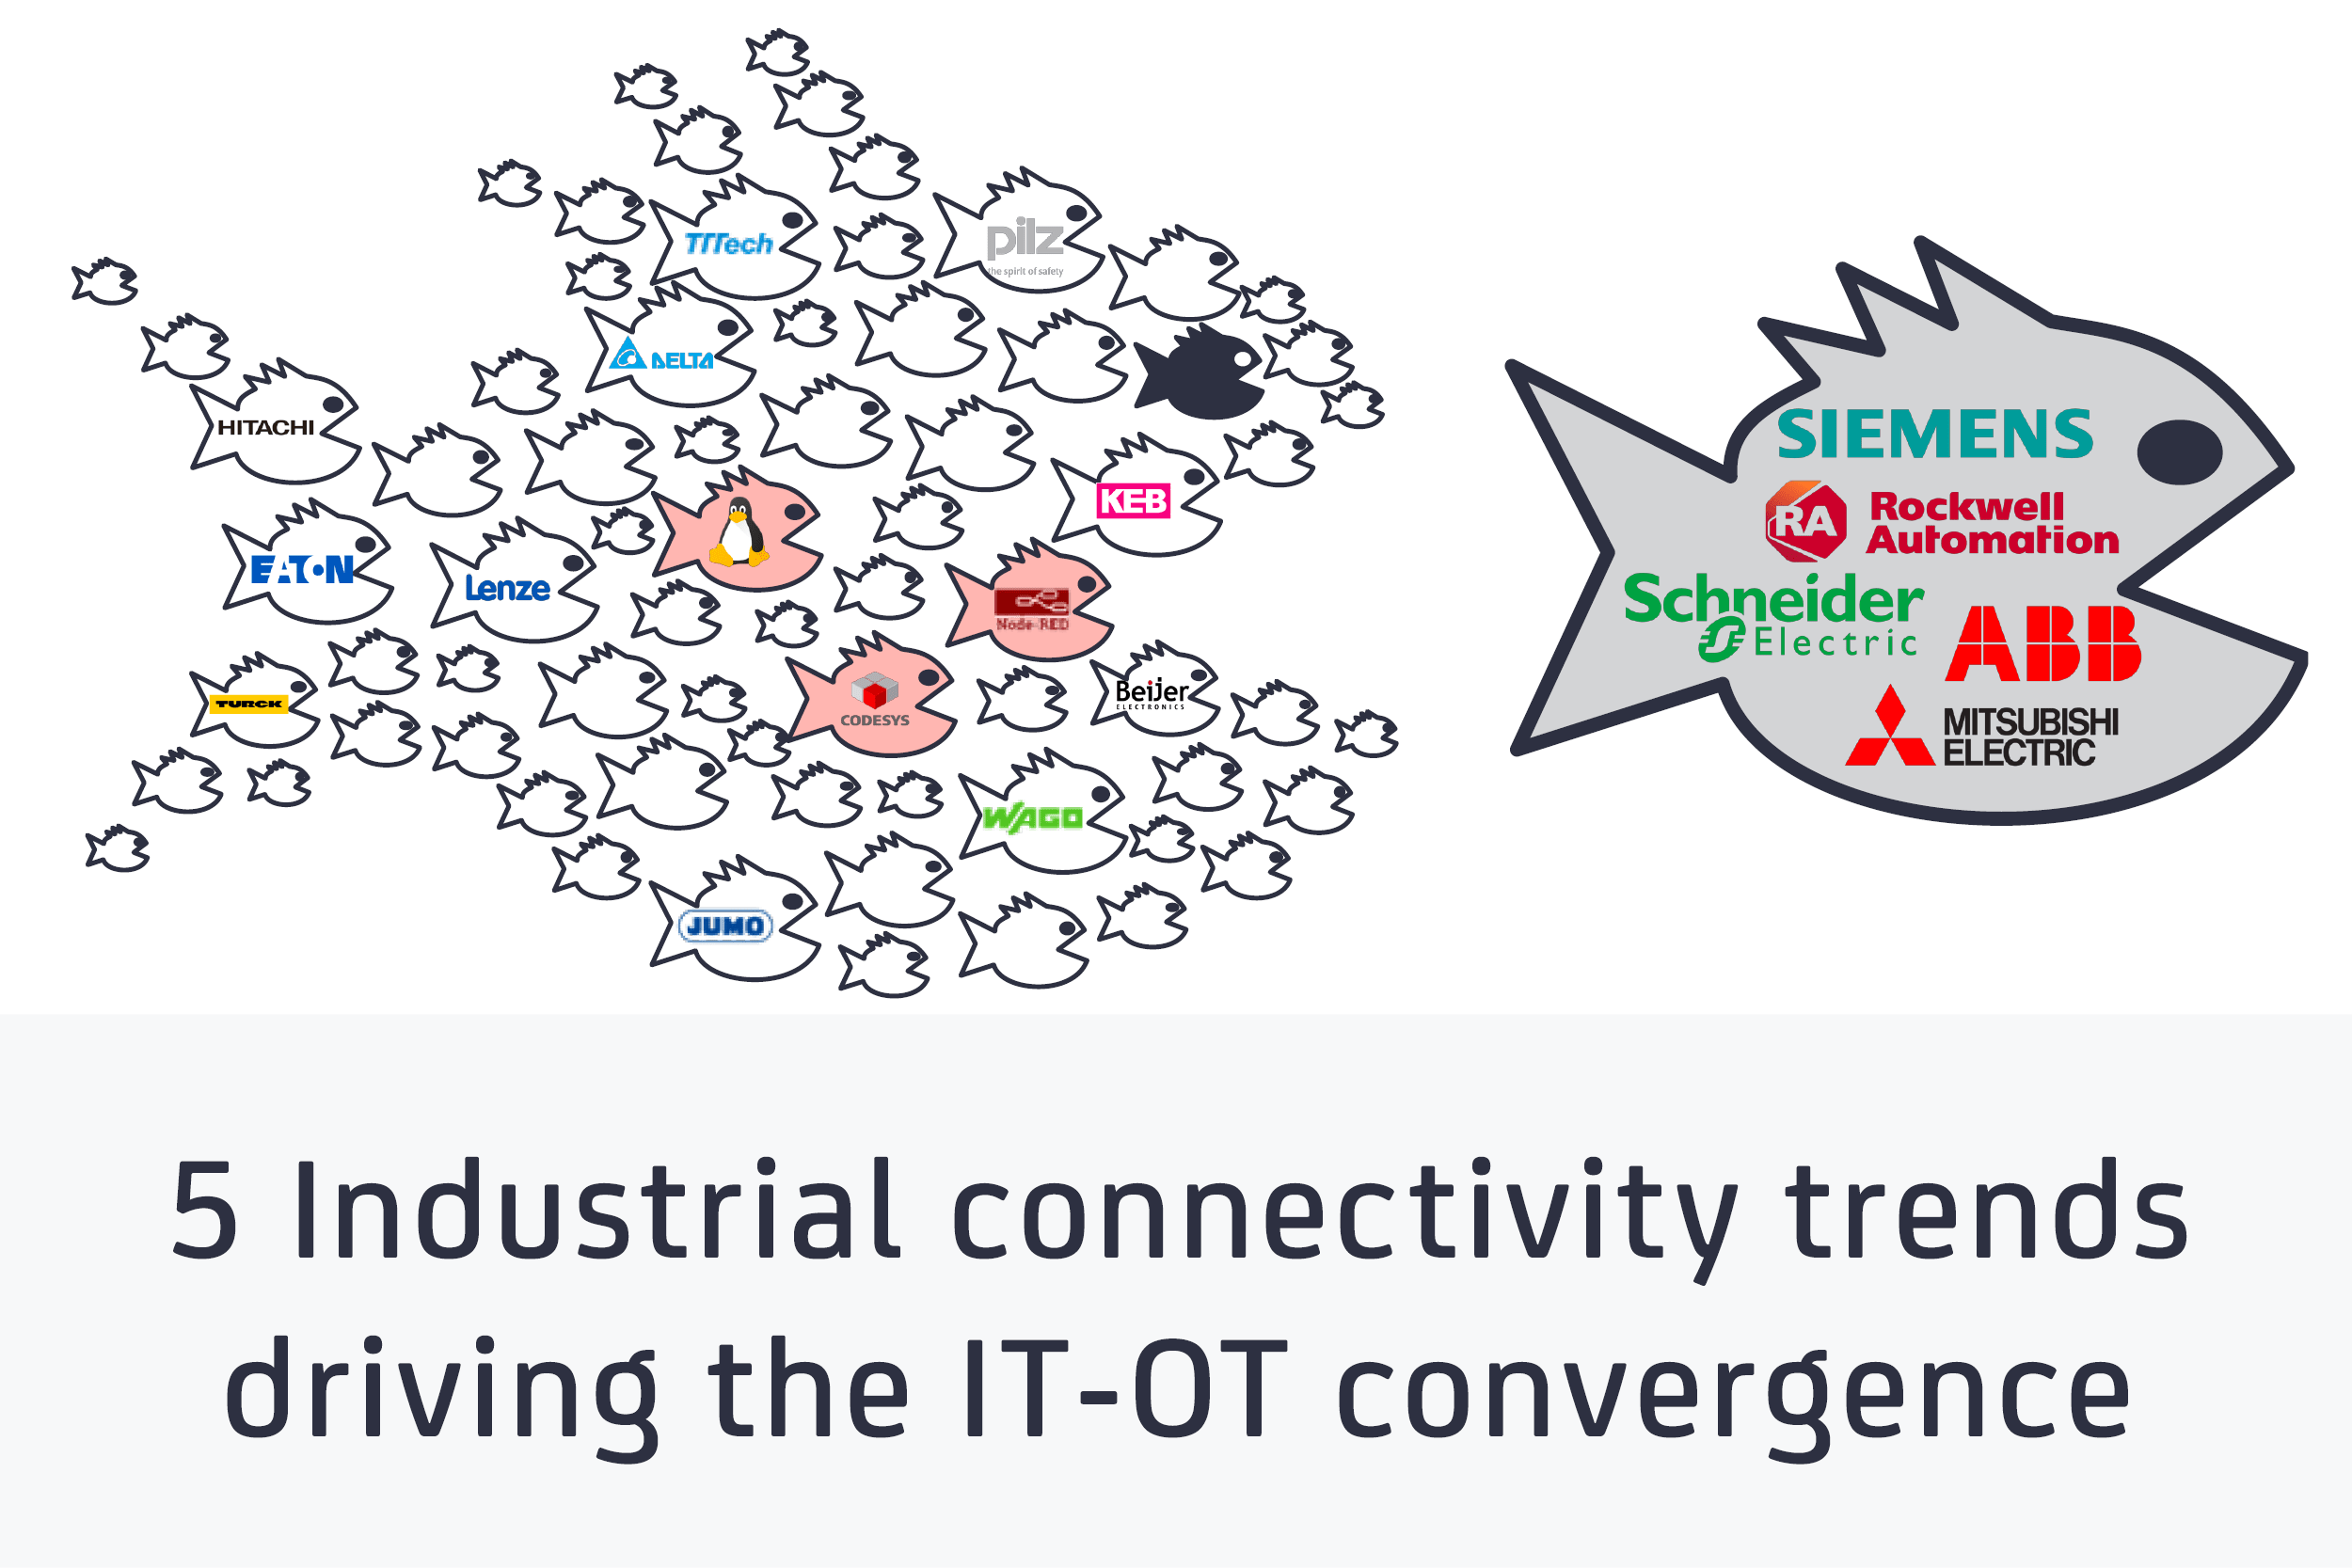 5 industrial connectivity trends driving the IT-OT convergence